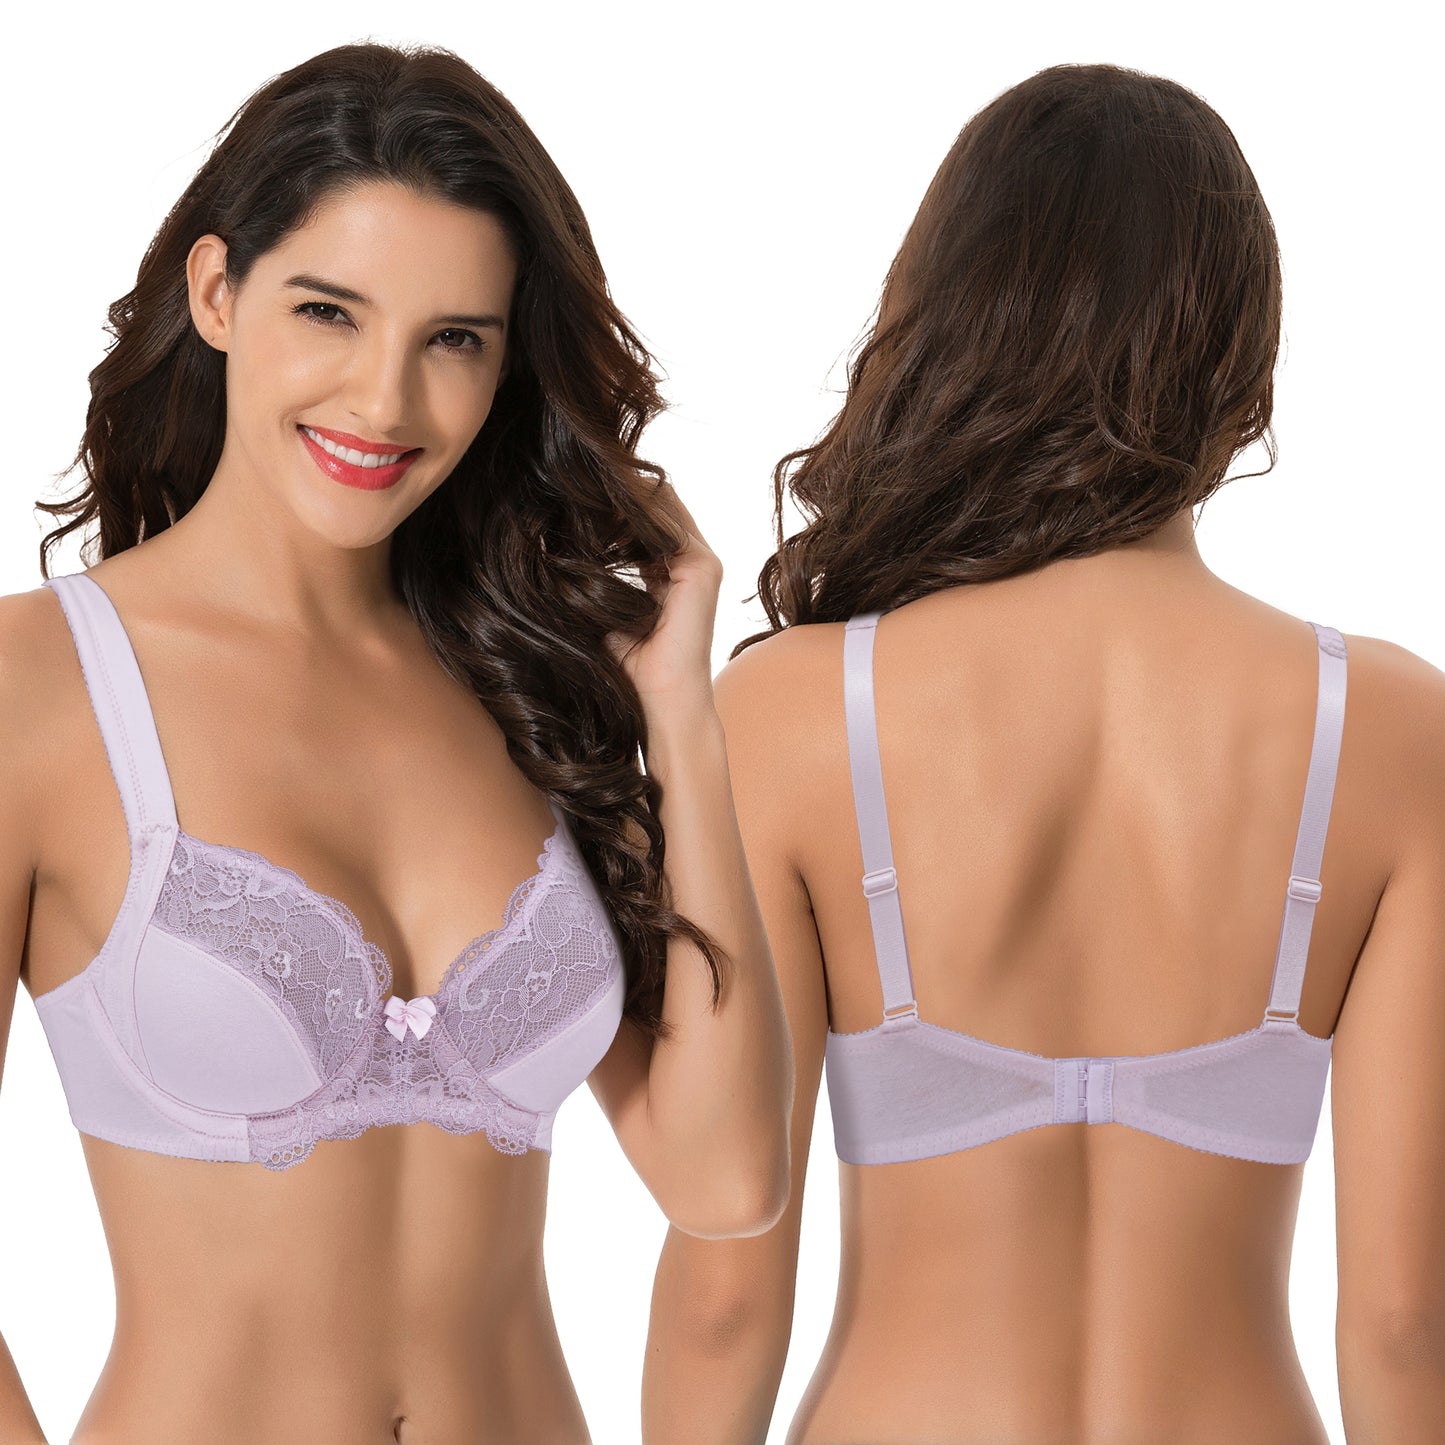 Women's Plus Size Unlined Underwire Lace Bra with Cushion Straps-2PK-White/Red/Lt Gray,Lt Pink